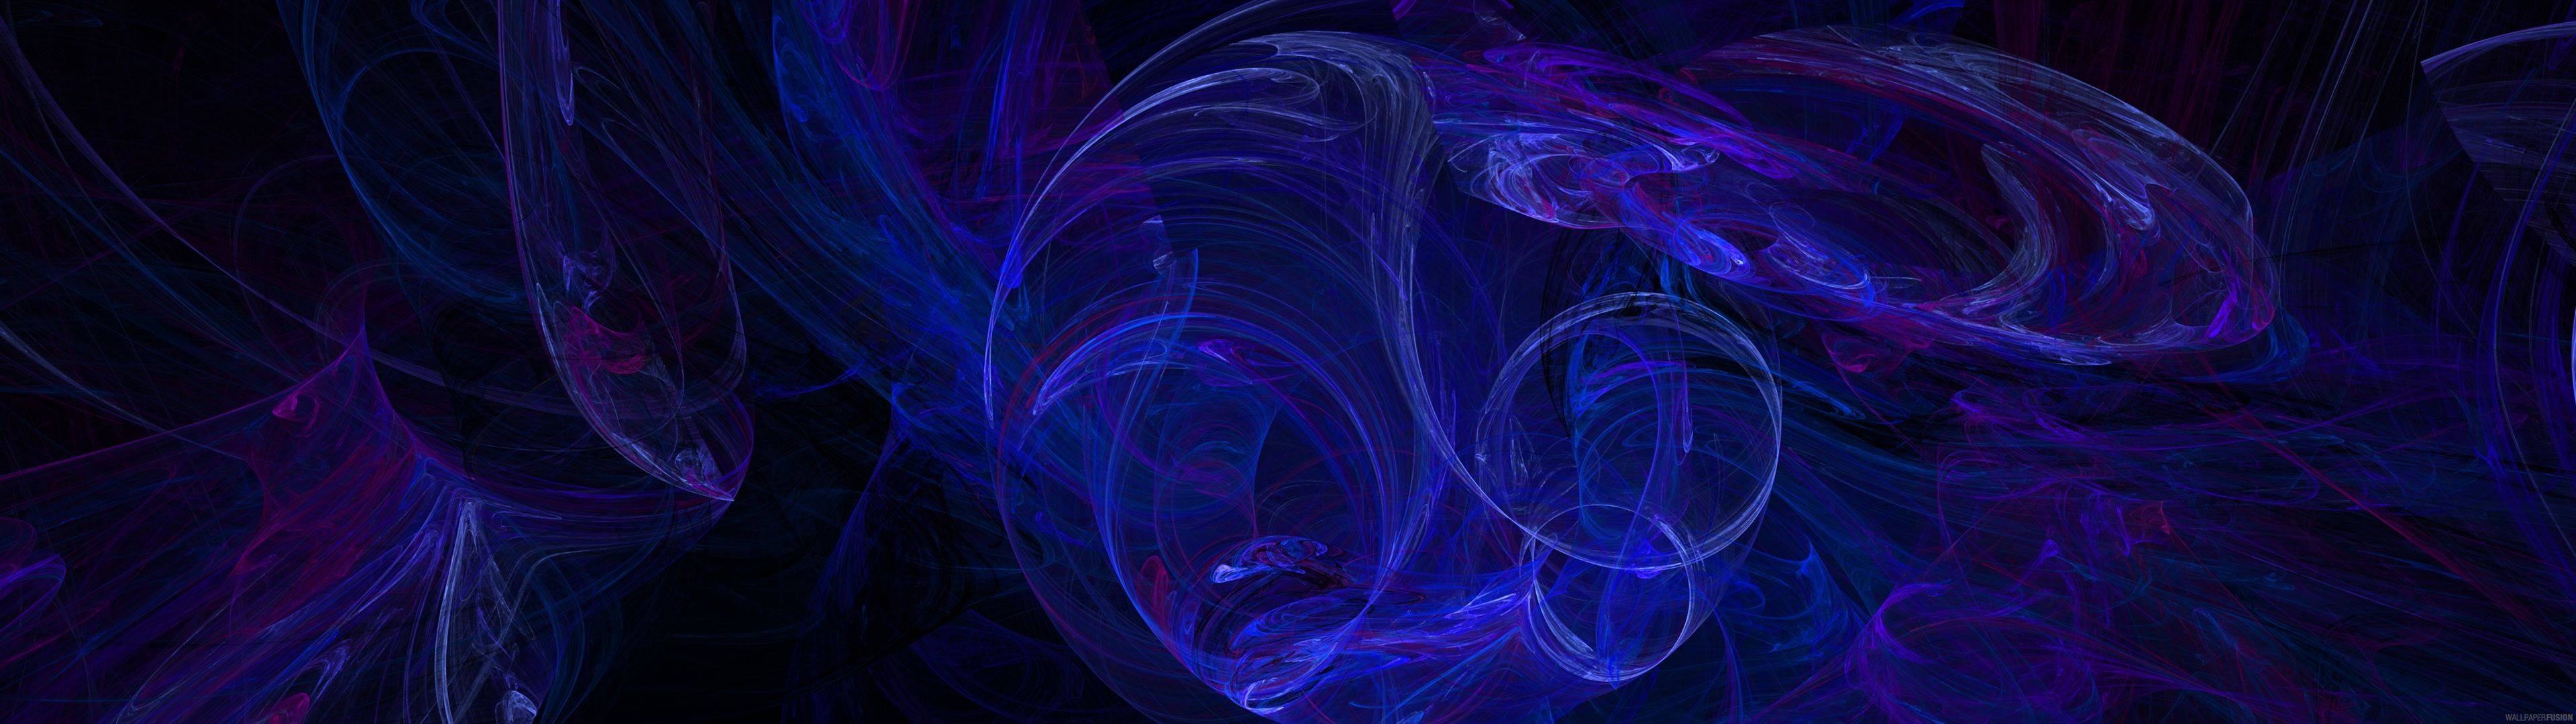 General 3840x1080 multiple display abstract digital art colorful